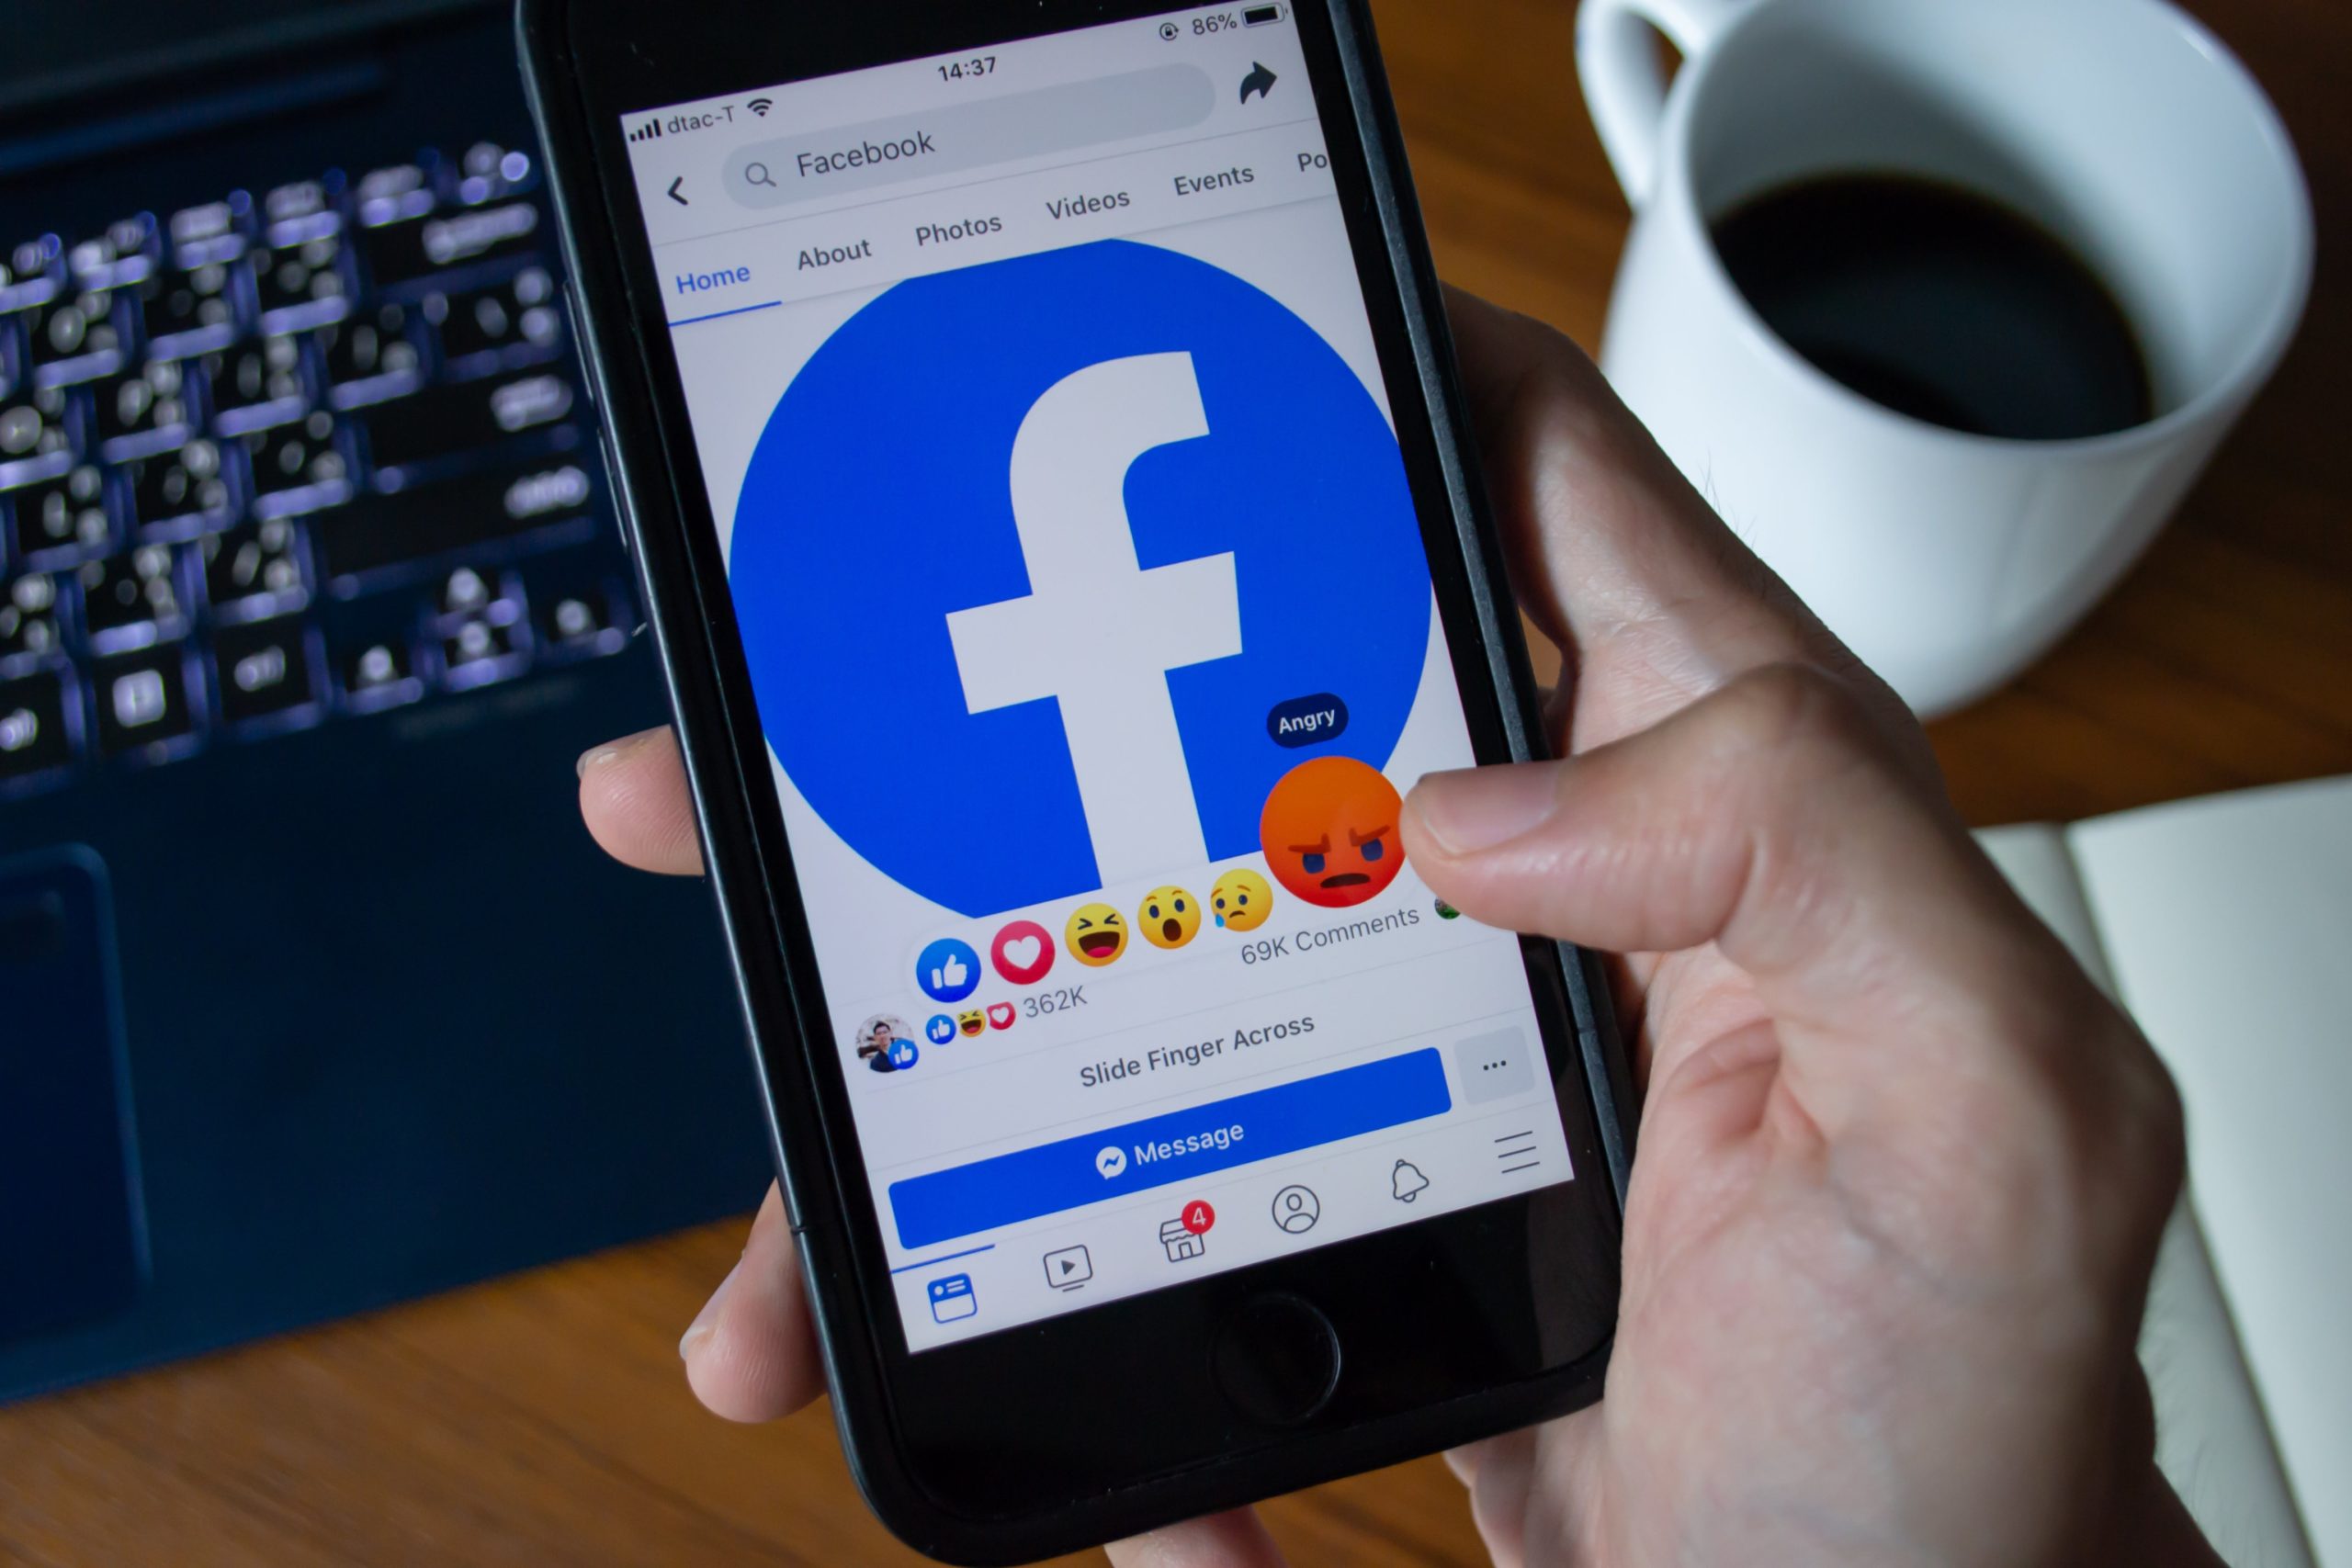 the Defence Department has announced new policies intended to root out extremism, prohibiting participation in extremist activities and warning that even Facebook likes of certain content could result in disciplinary action.  (Image: Shutterstock, Shutterstock)